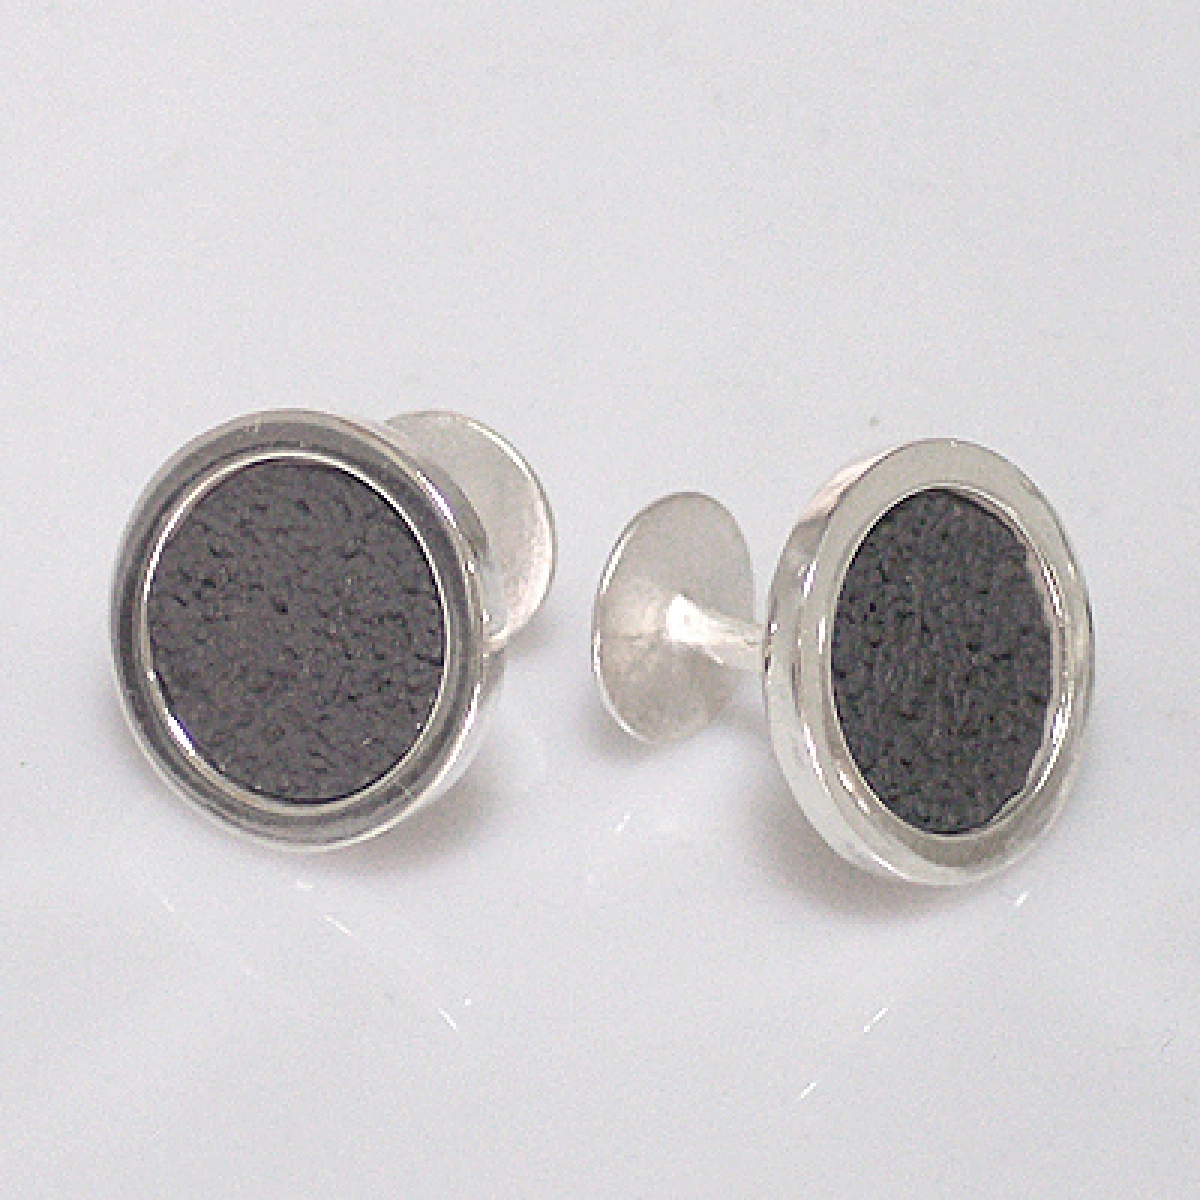 CUFFLINKS ARE STERLING SILVER, WITH A MOTIF TEXTURED AND SATIN FINISH AND BRIGHTNESS. CRESBER To Sara